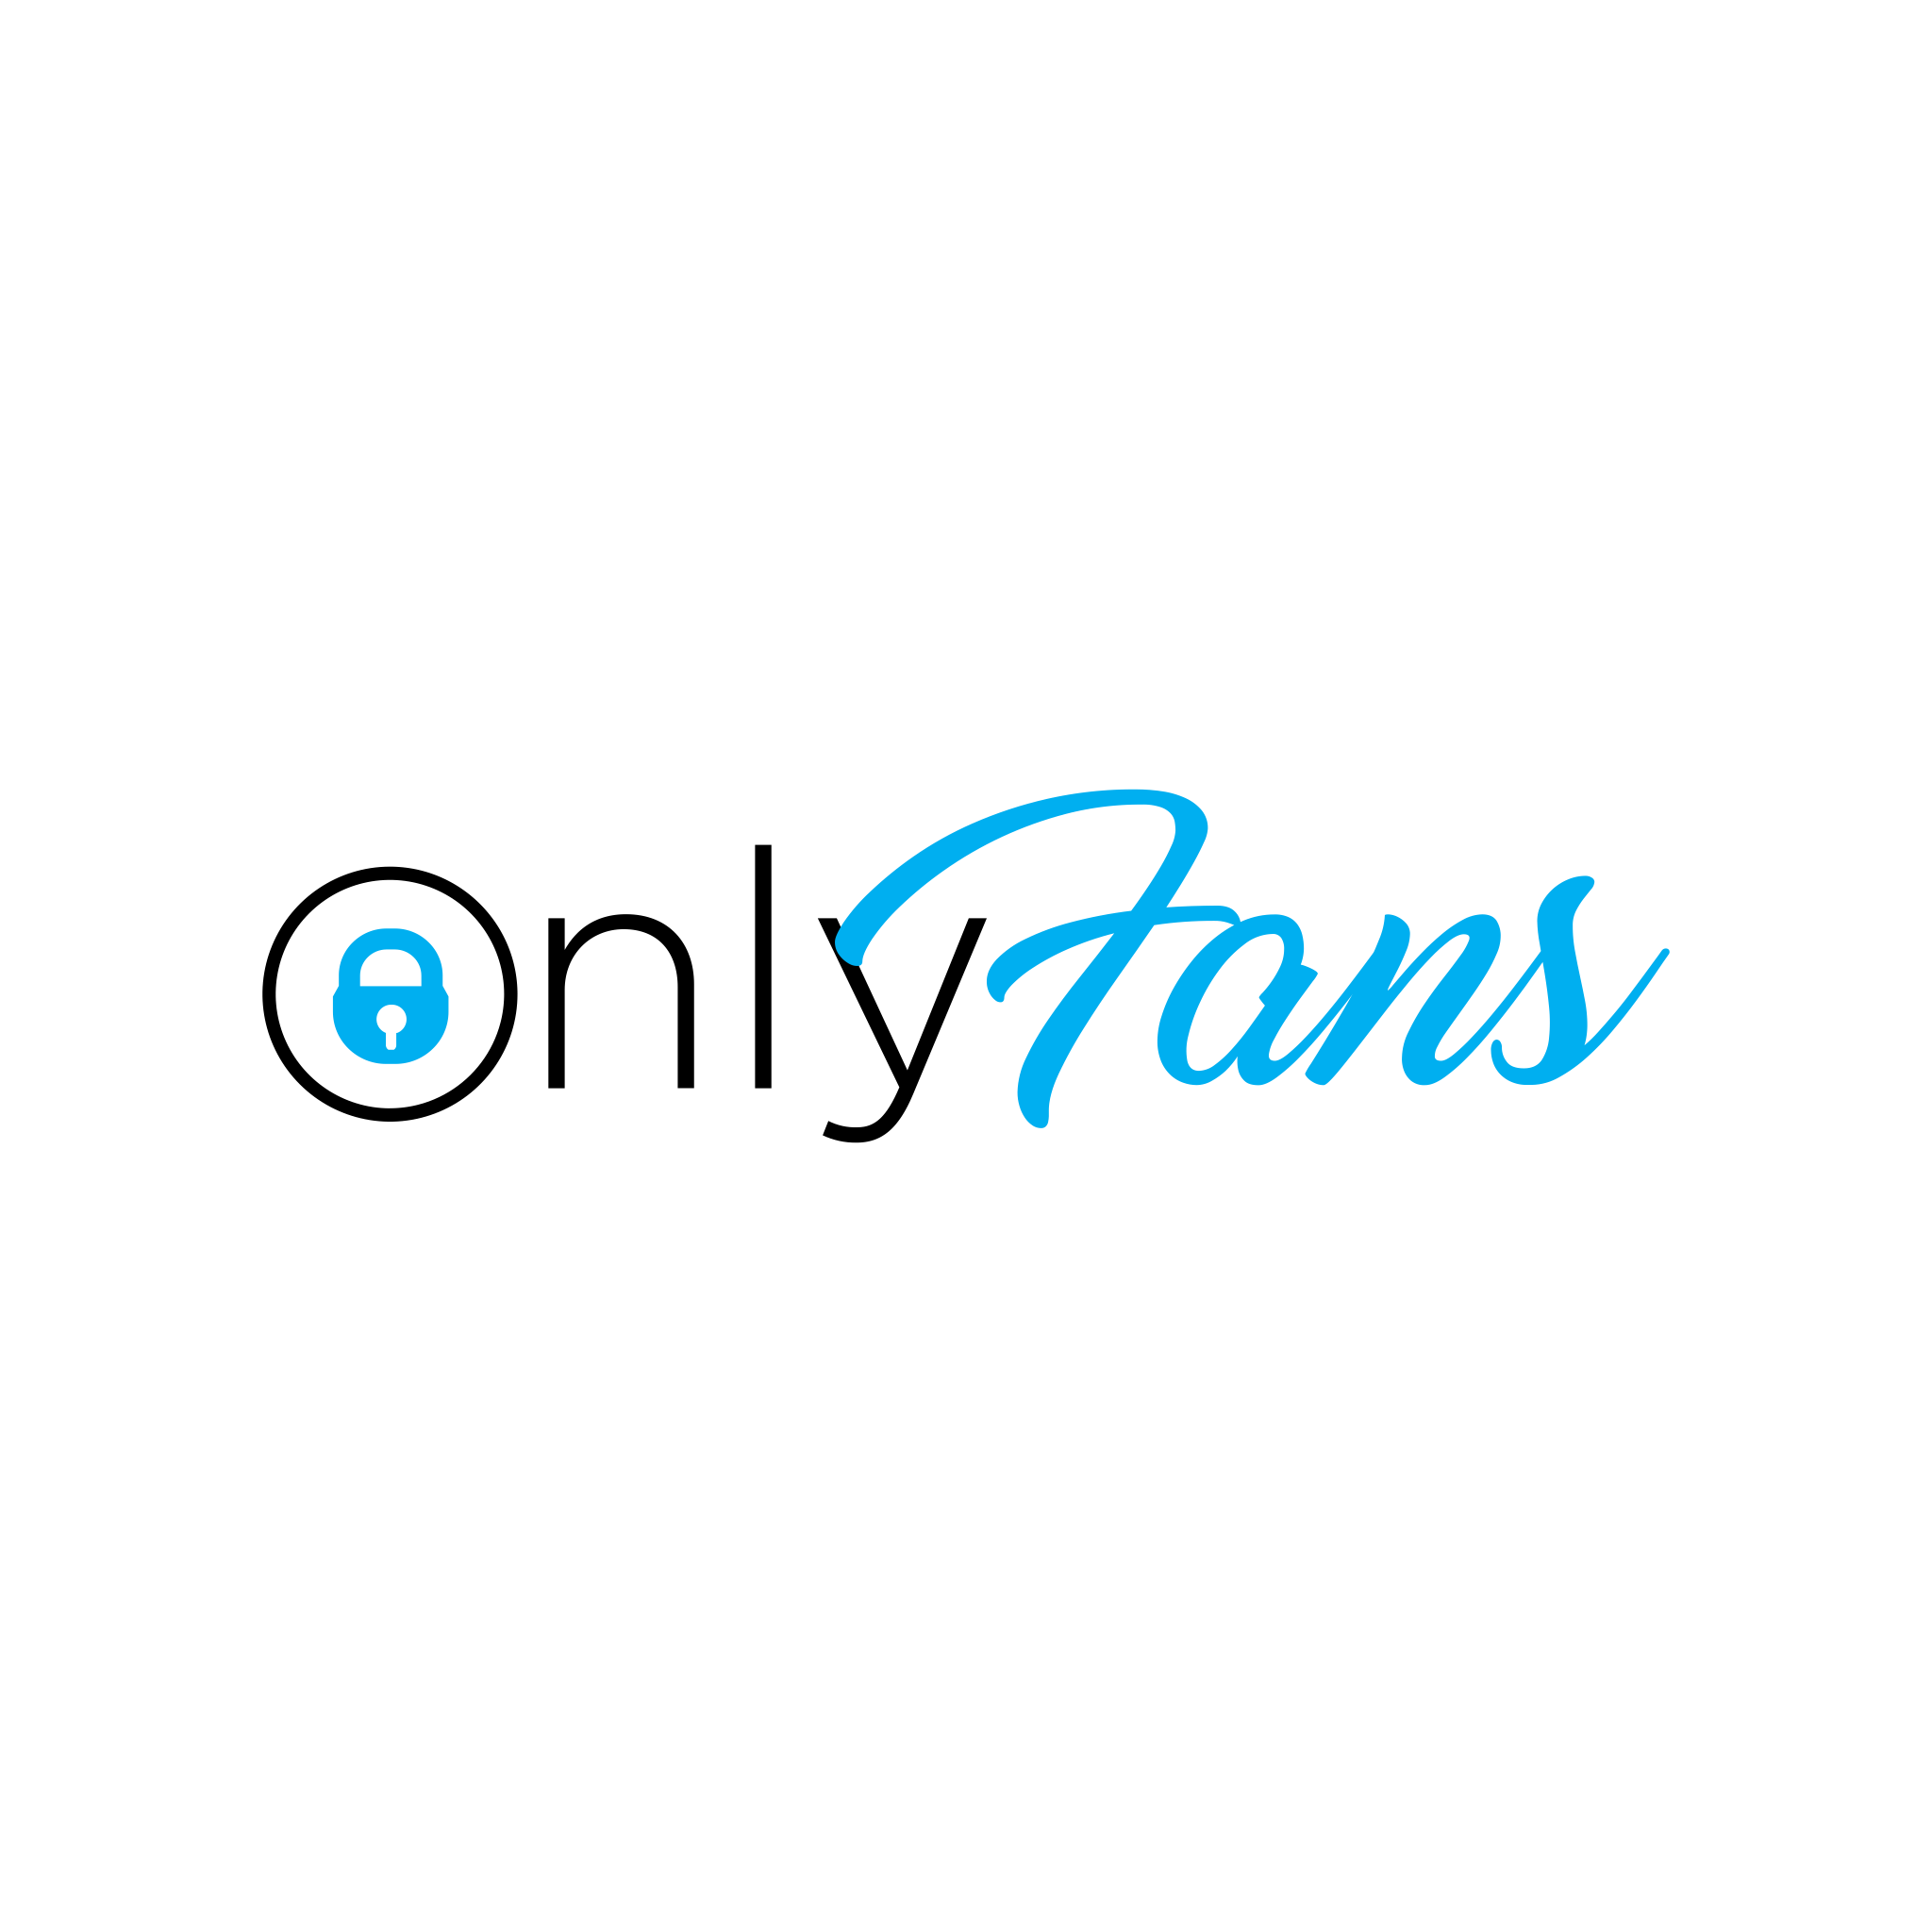 Only Fans Logo PNG HD